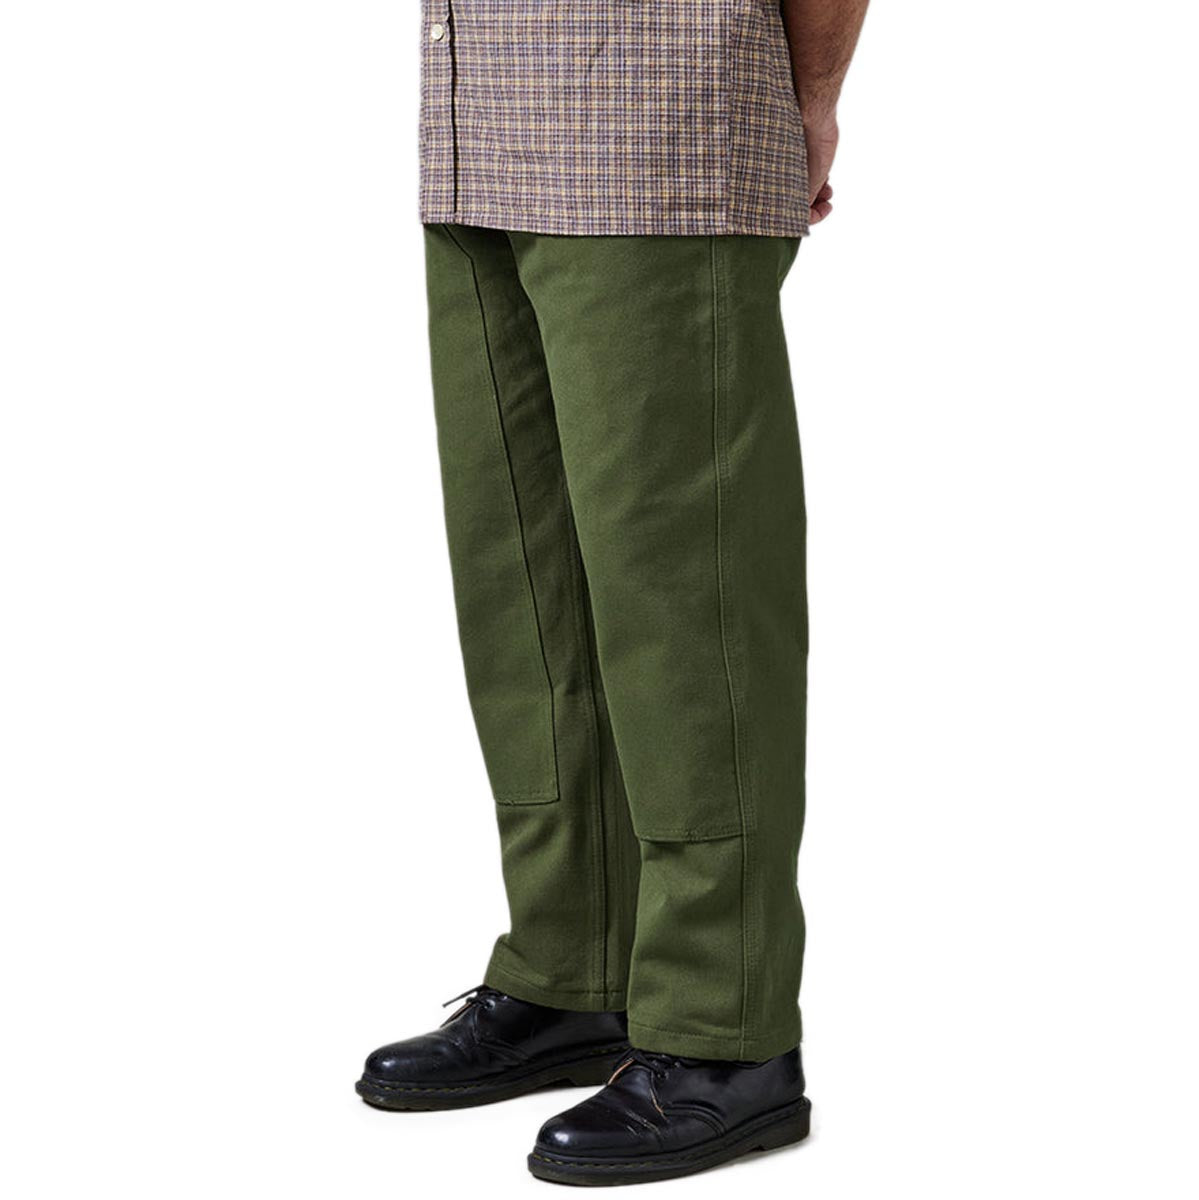 Passport Double Knee Diggers Club Pants - Olive image 2